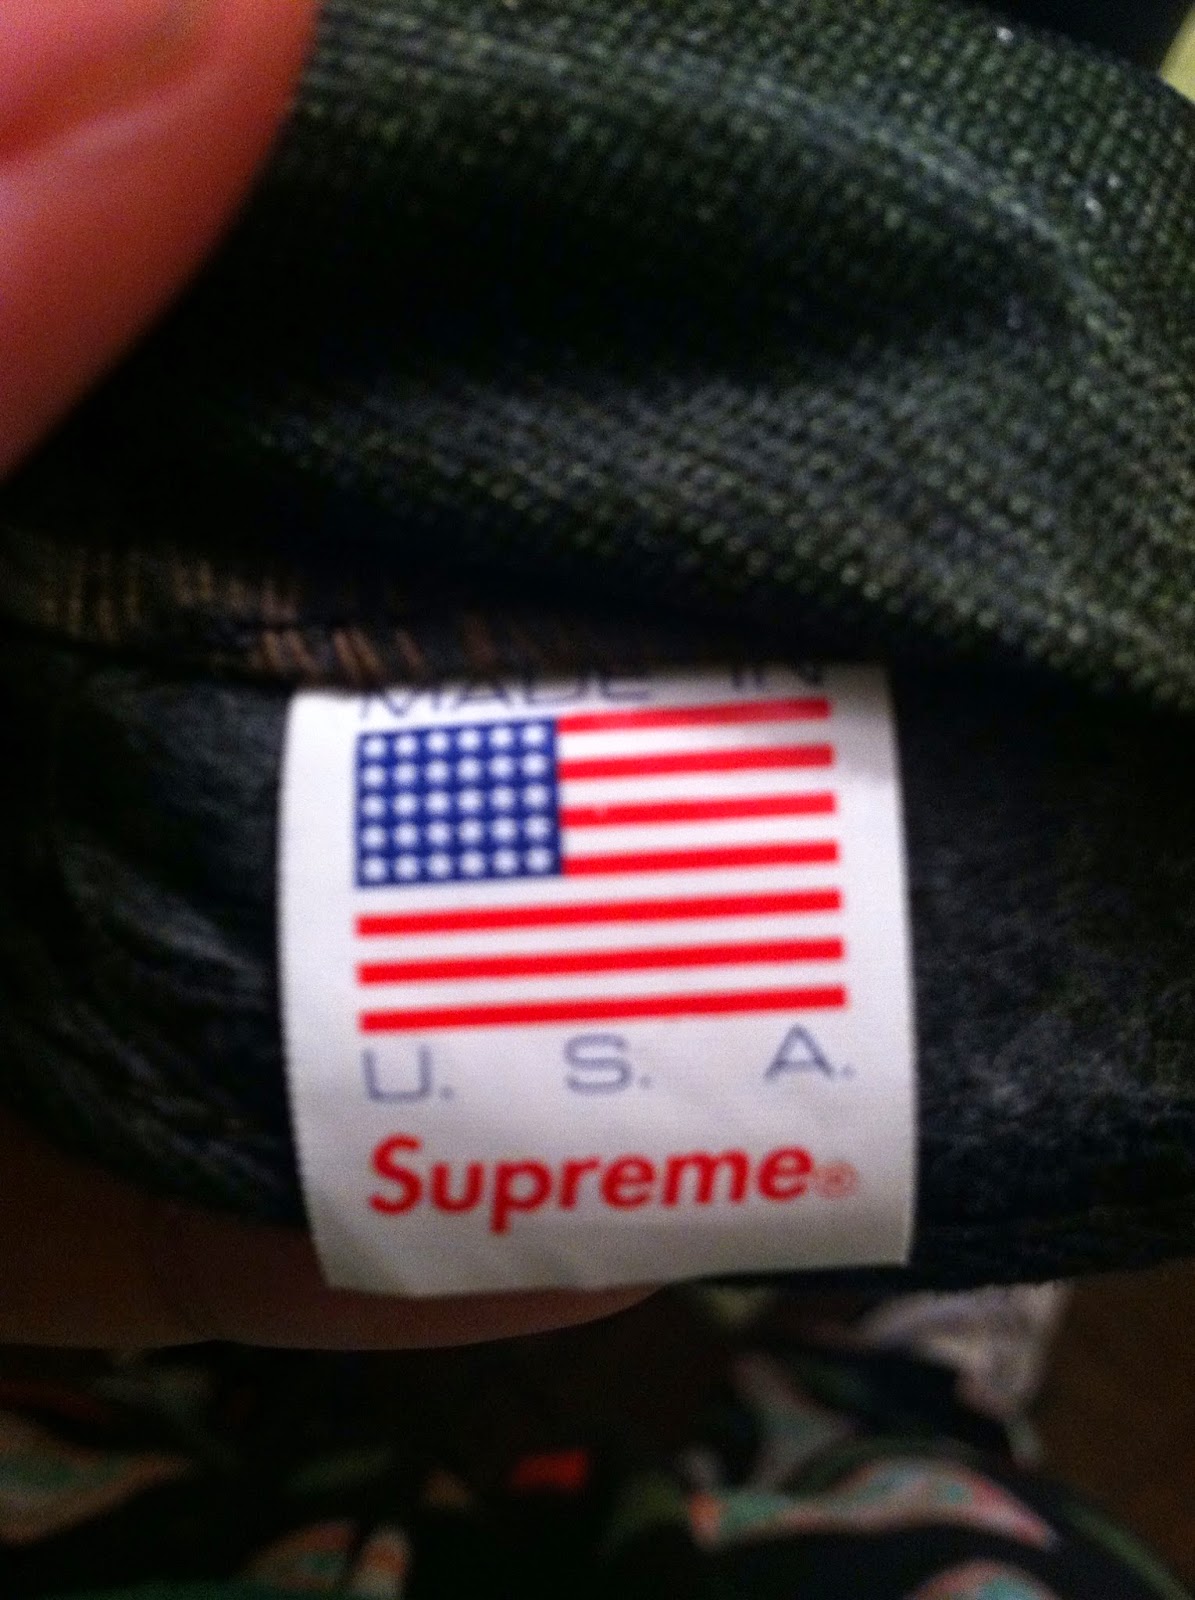 Street Knowledge : How to tell if your Supreme hat is FAKE!